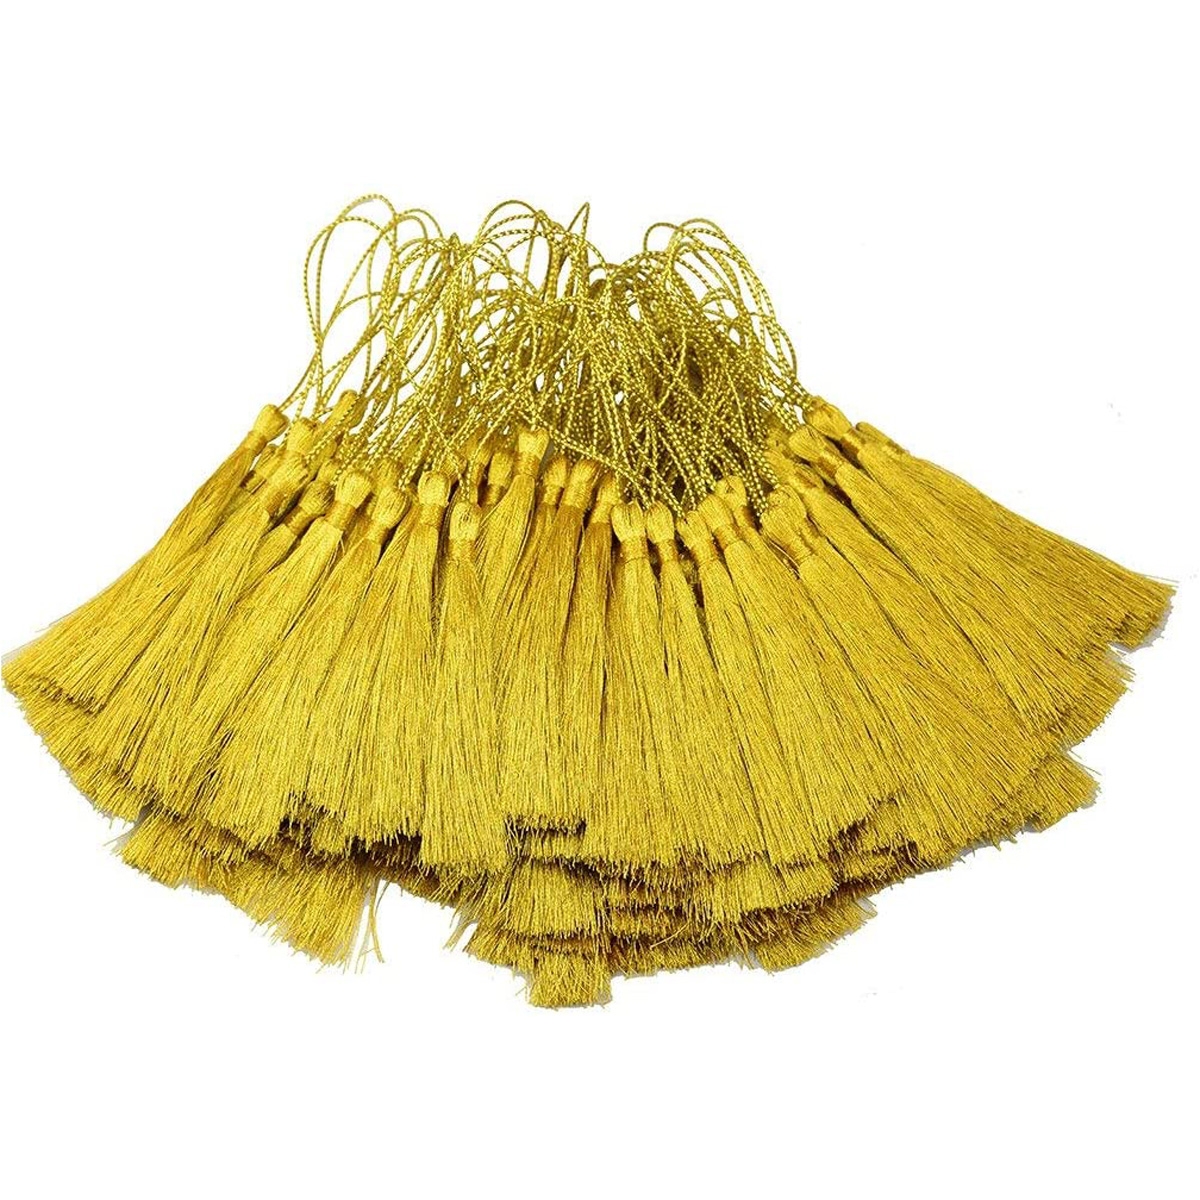 5 Inch Silky Floss Bookmark Tassels with 2-Inch Cord Loop and Small Chinese Knot for Jewelry Making